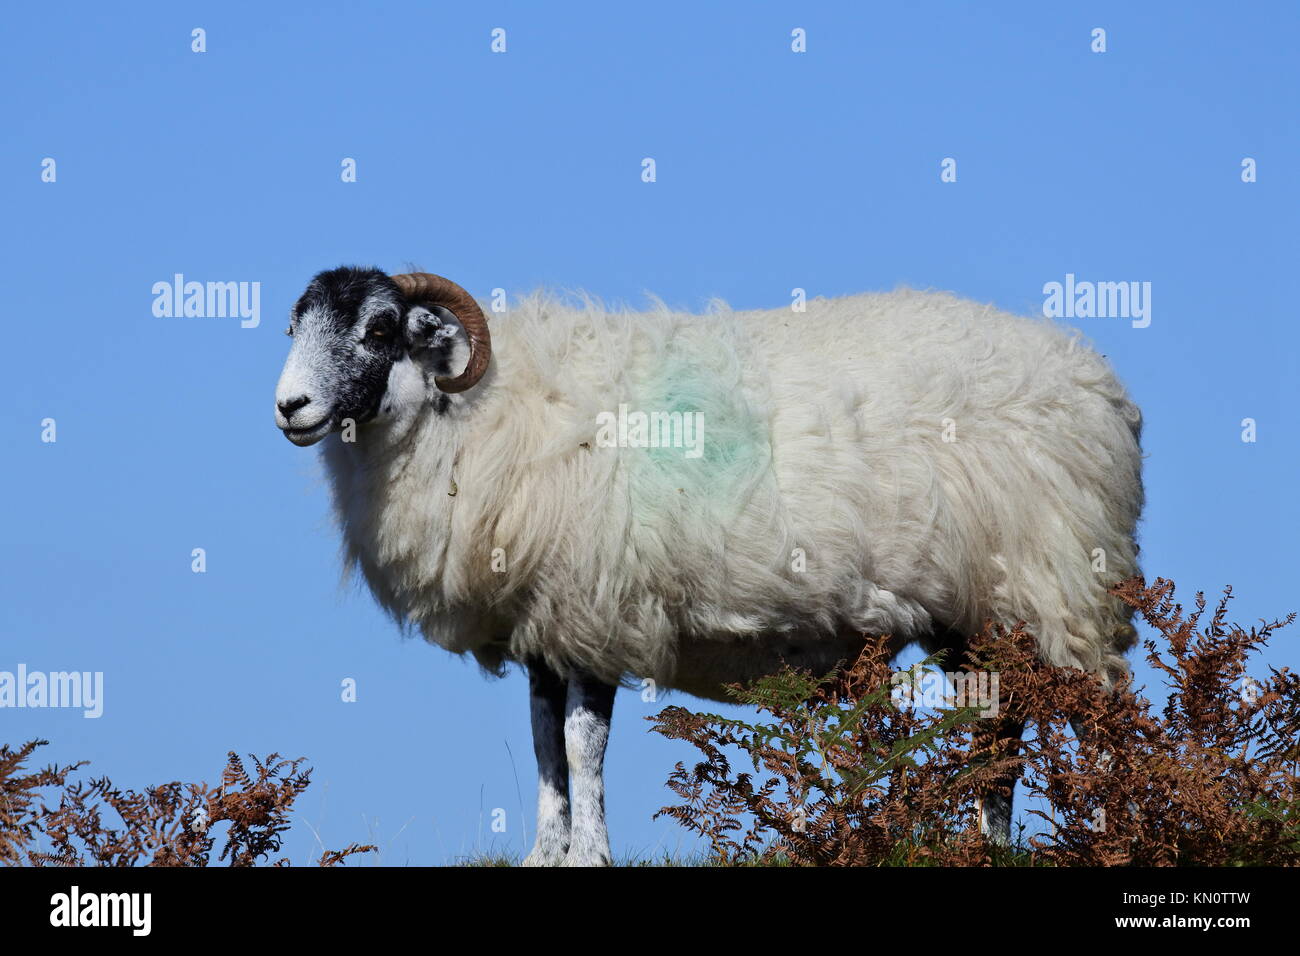 Scottish Blackface sheep standing in heather with a clear blue sky Stock Photo